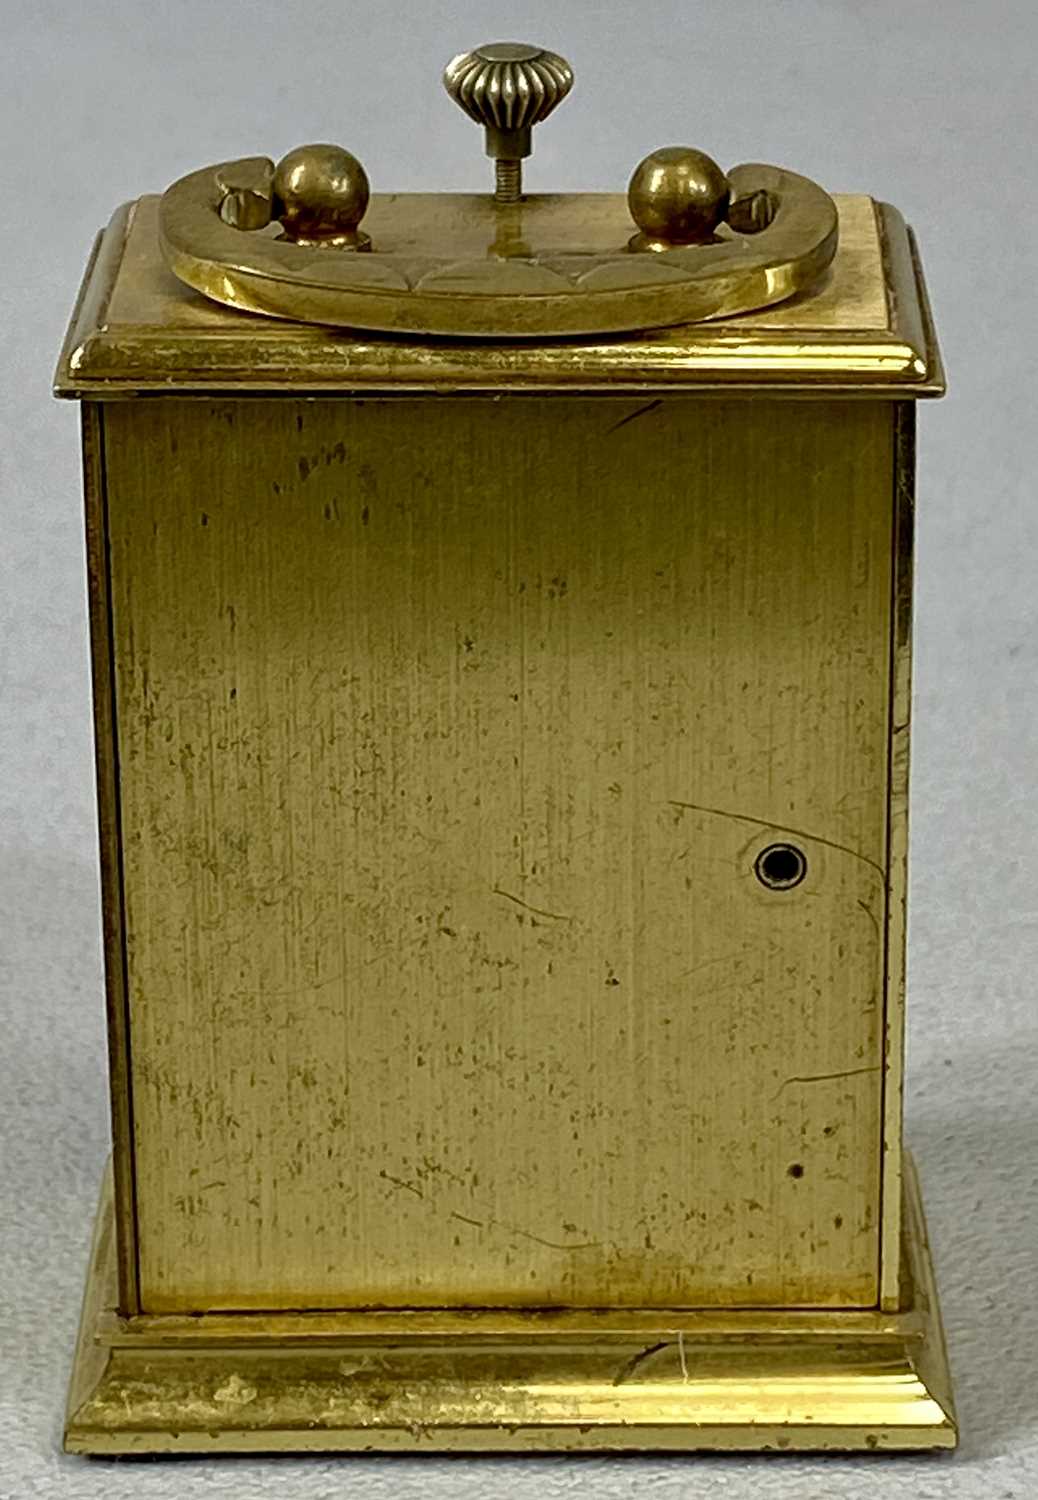 MINIATURE FRENCH GILDED BRASS CARRIAGE CLOCK, early 20th century, three quarter silvered dial with - Image 4 of 4